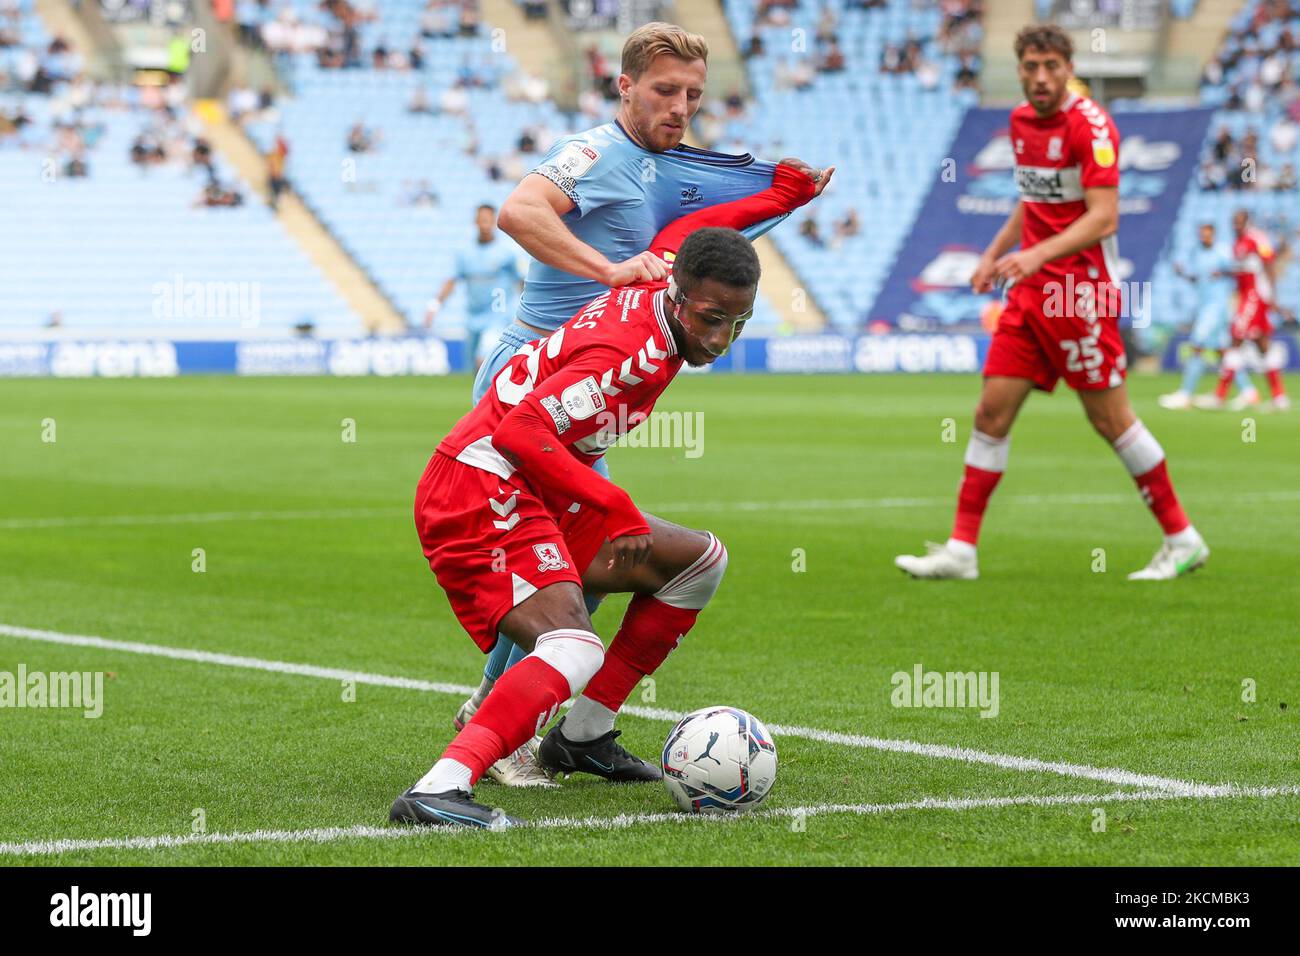 Middlesbrough's Isaiah Jones is challenged by Coventry City's Jamie Allen during the first half of the Sky Bet Championship match between Coventry City and Middlesbrough at the Ricoh Arena, Coventry on Saturday 11th September 2021. (Photo by John Cripps/MI News/NurPhoto) Stock Photo